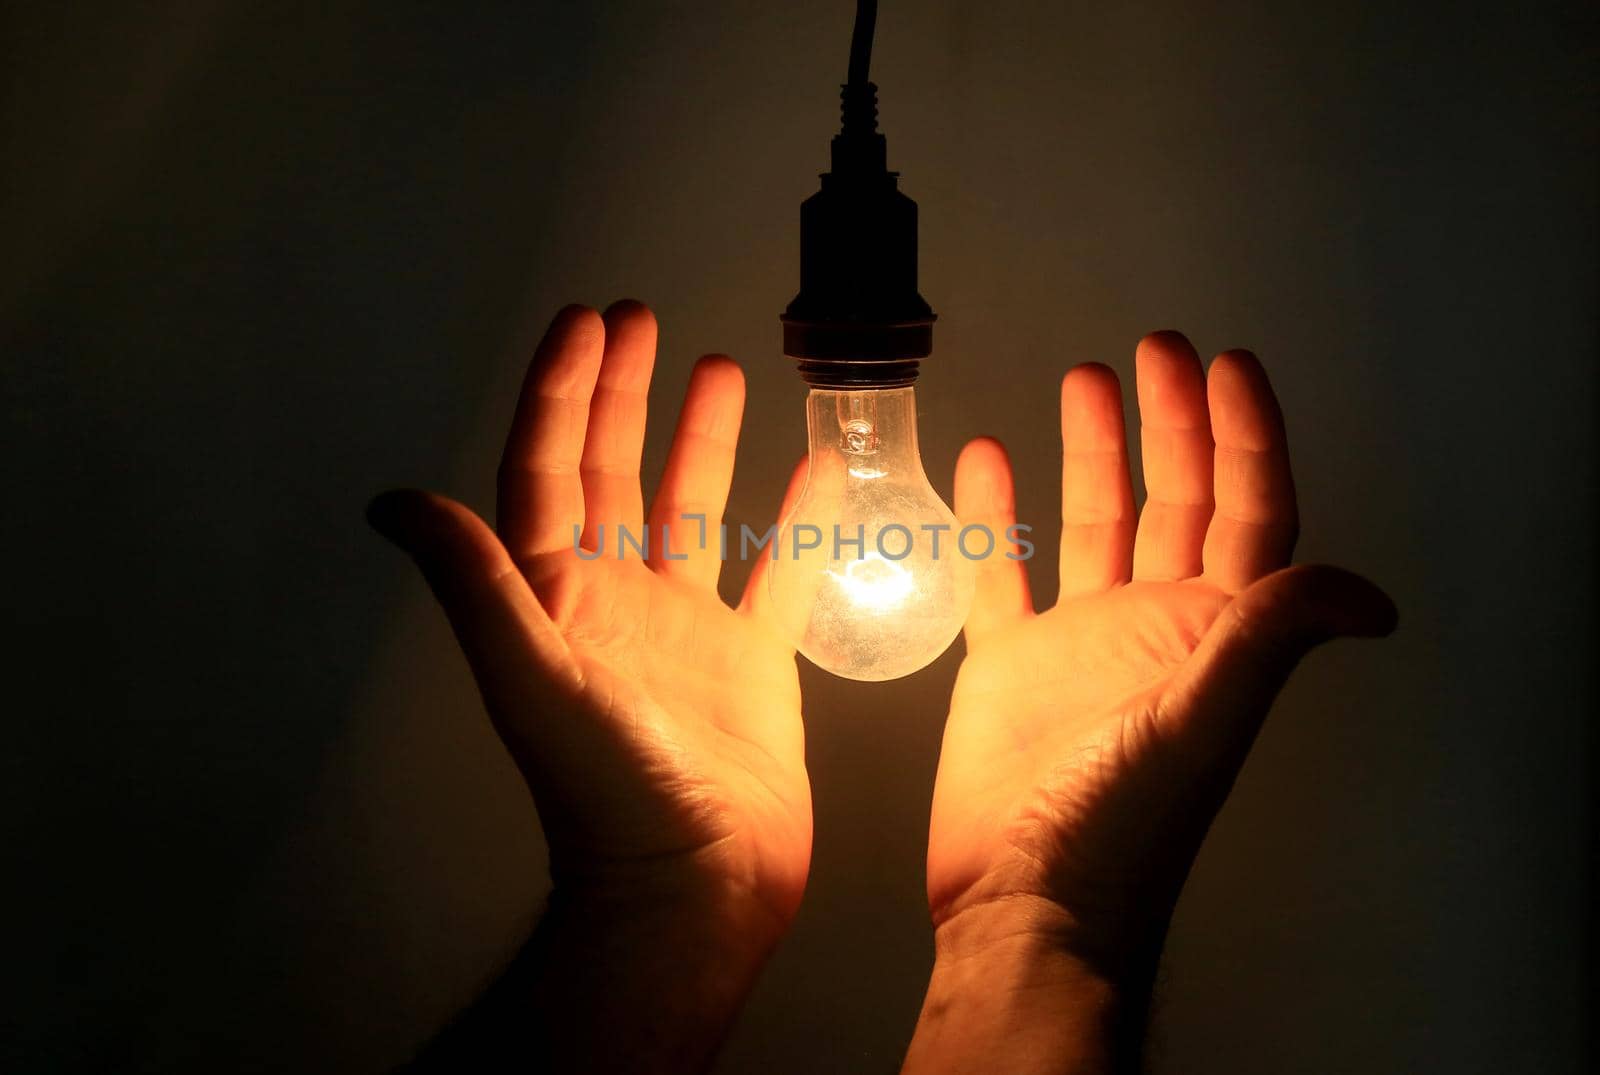 hands holding incandescent lamp by joasouza